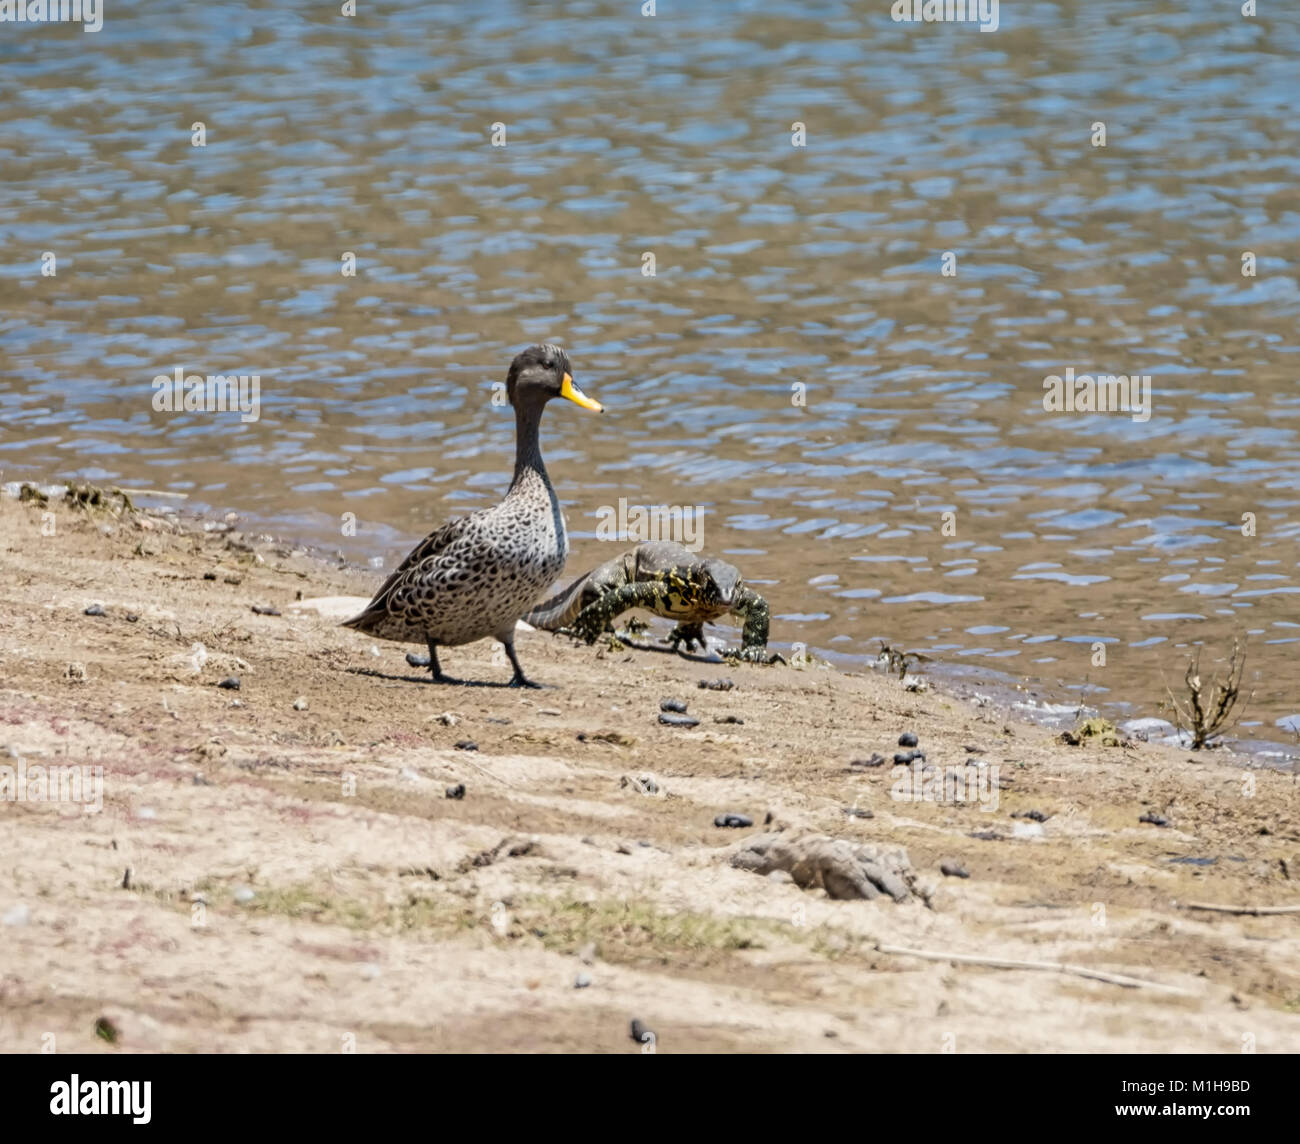 A Nile Monitor and Yellow-billed Ducks at a watering hole in Southern African savanna Stock Photo